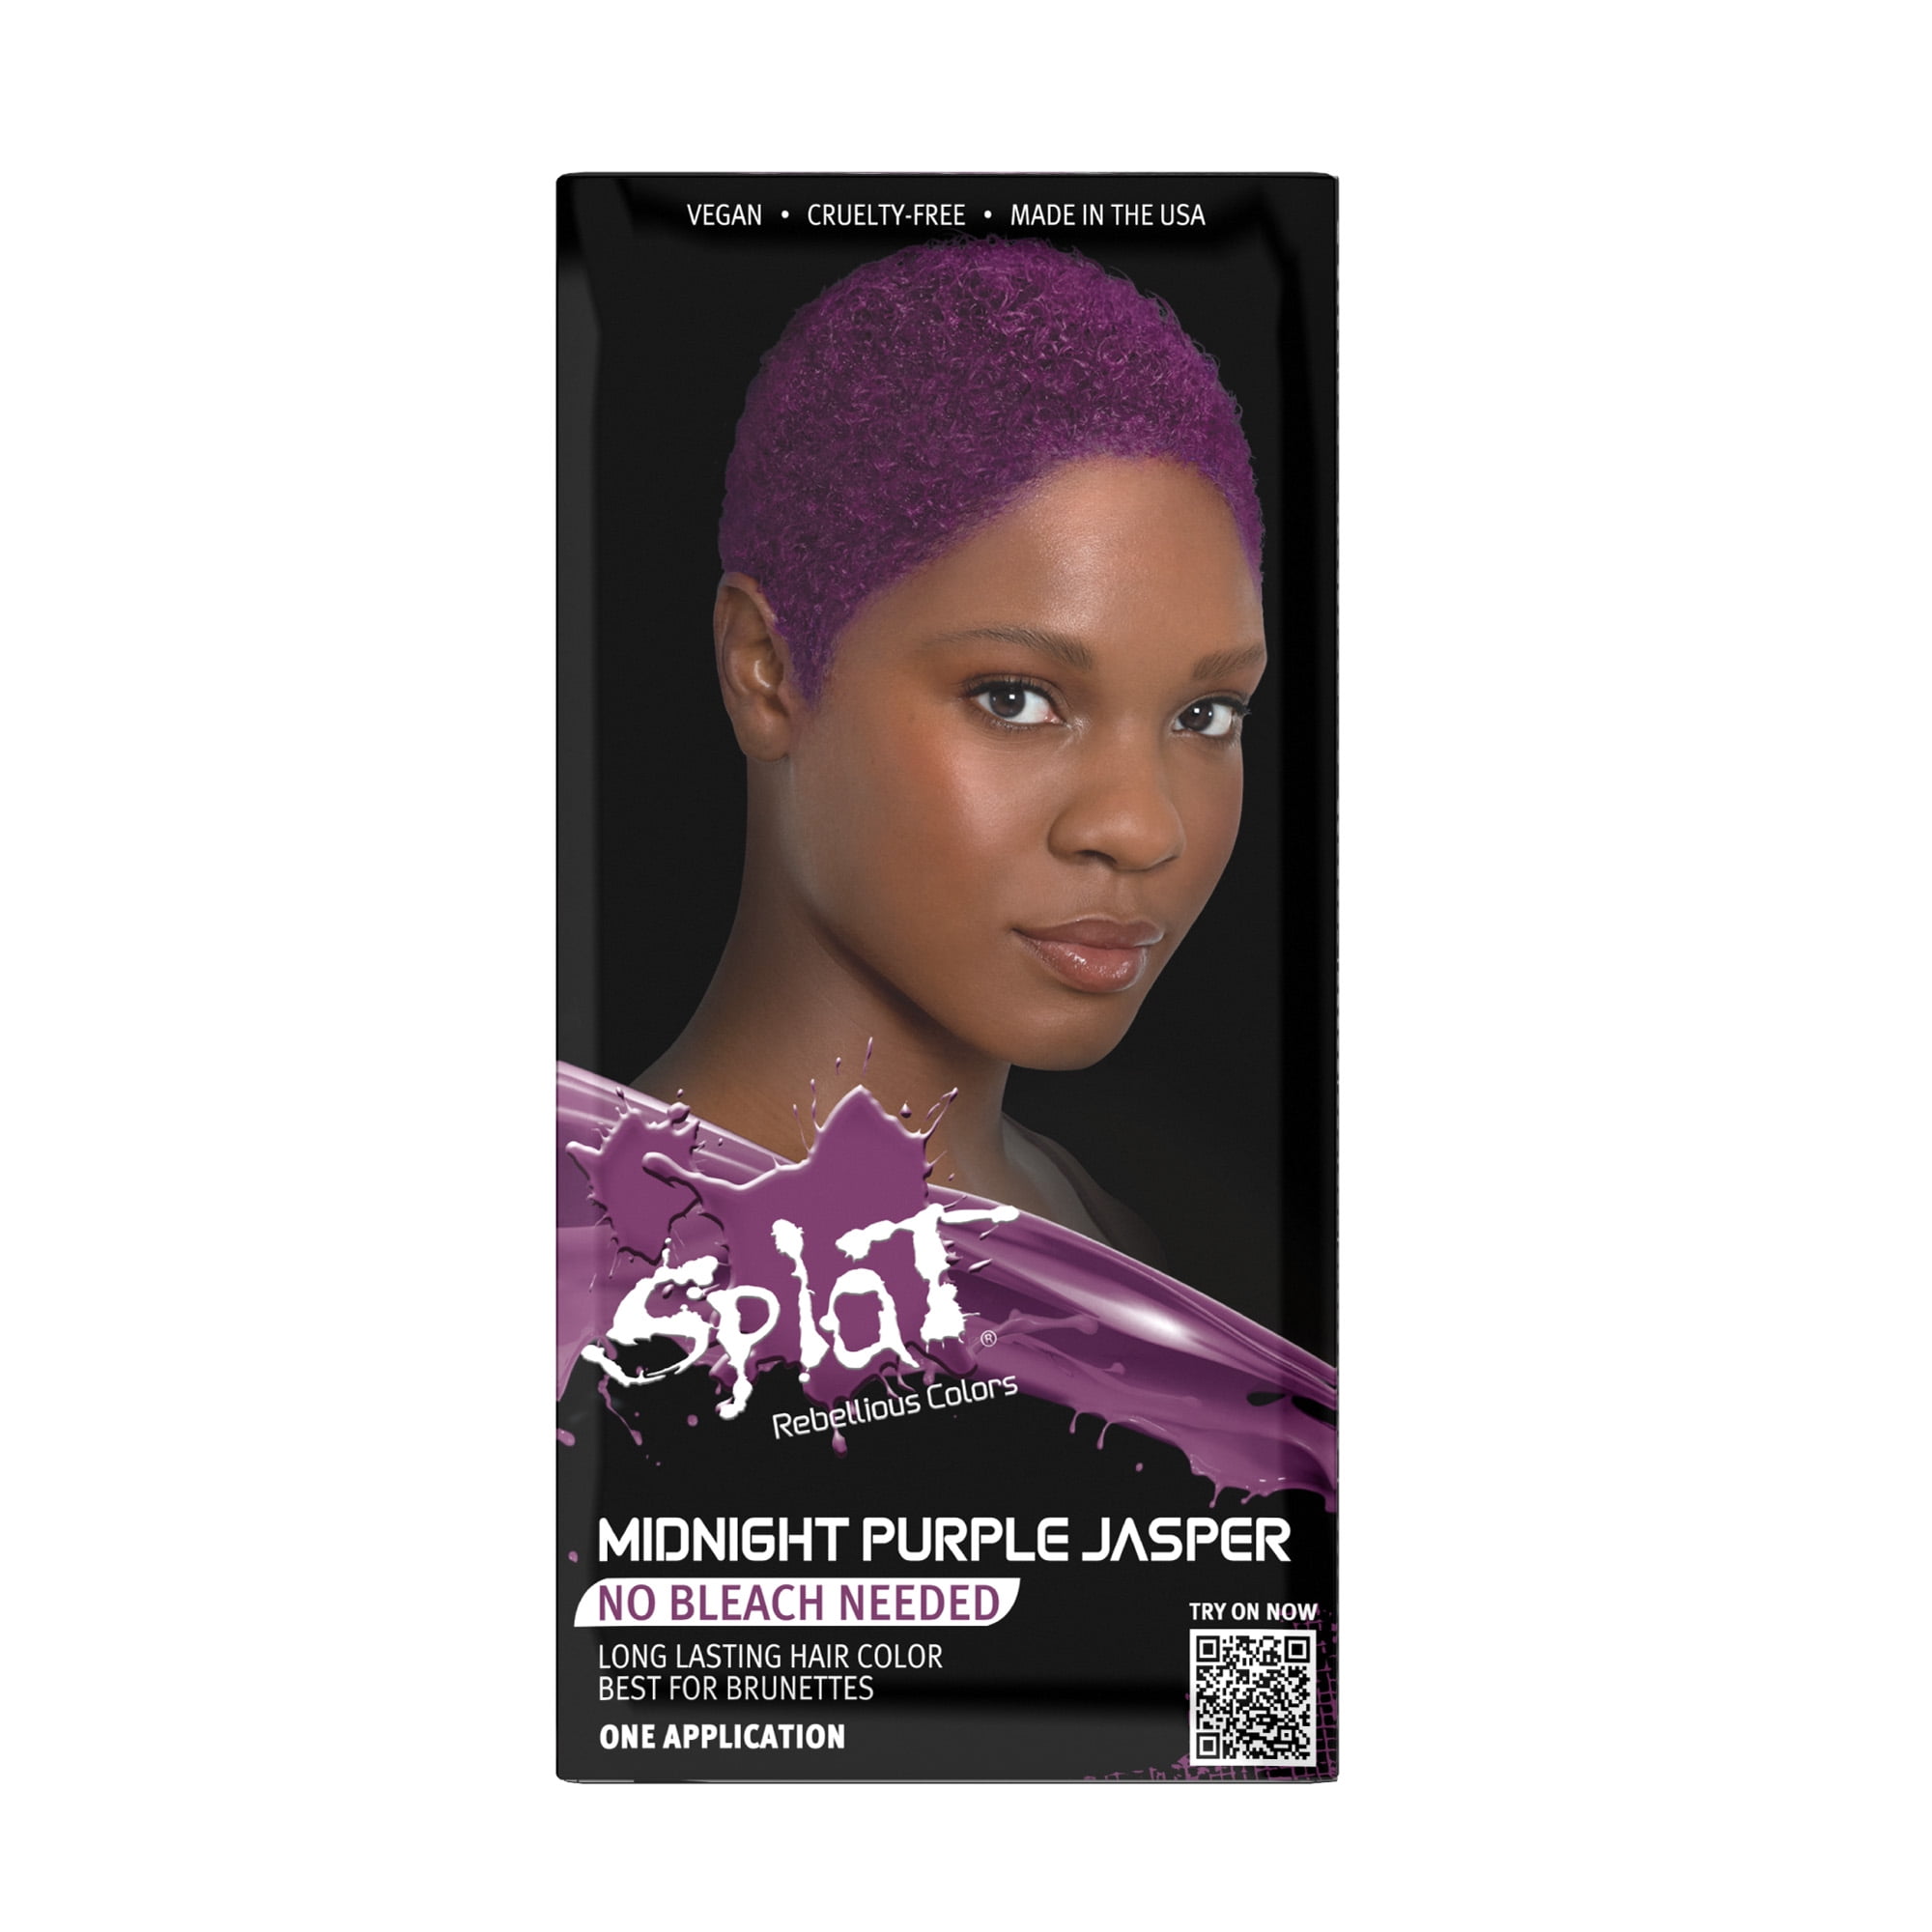 How to Use Dark Purple Hair Dye Without Bleach